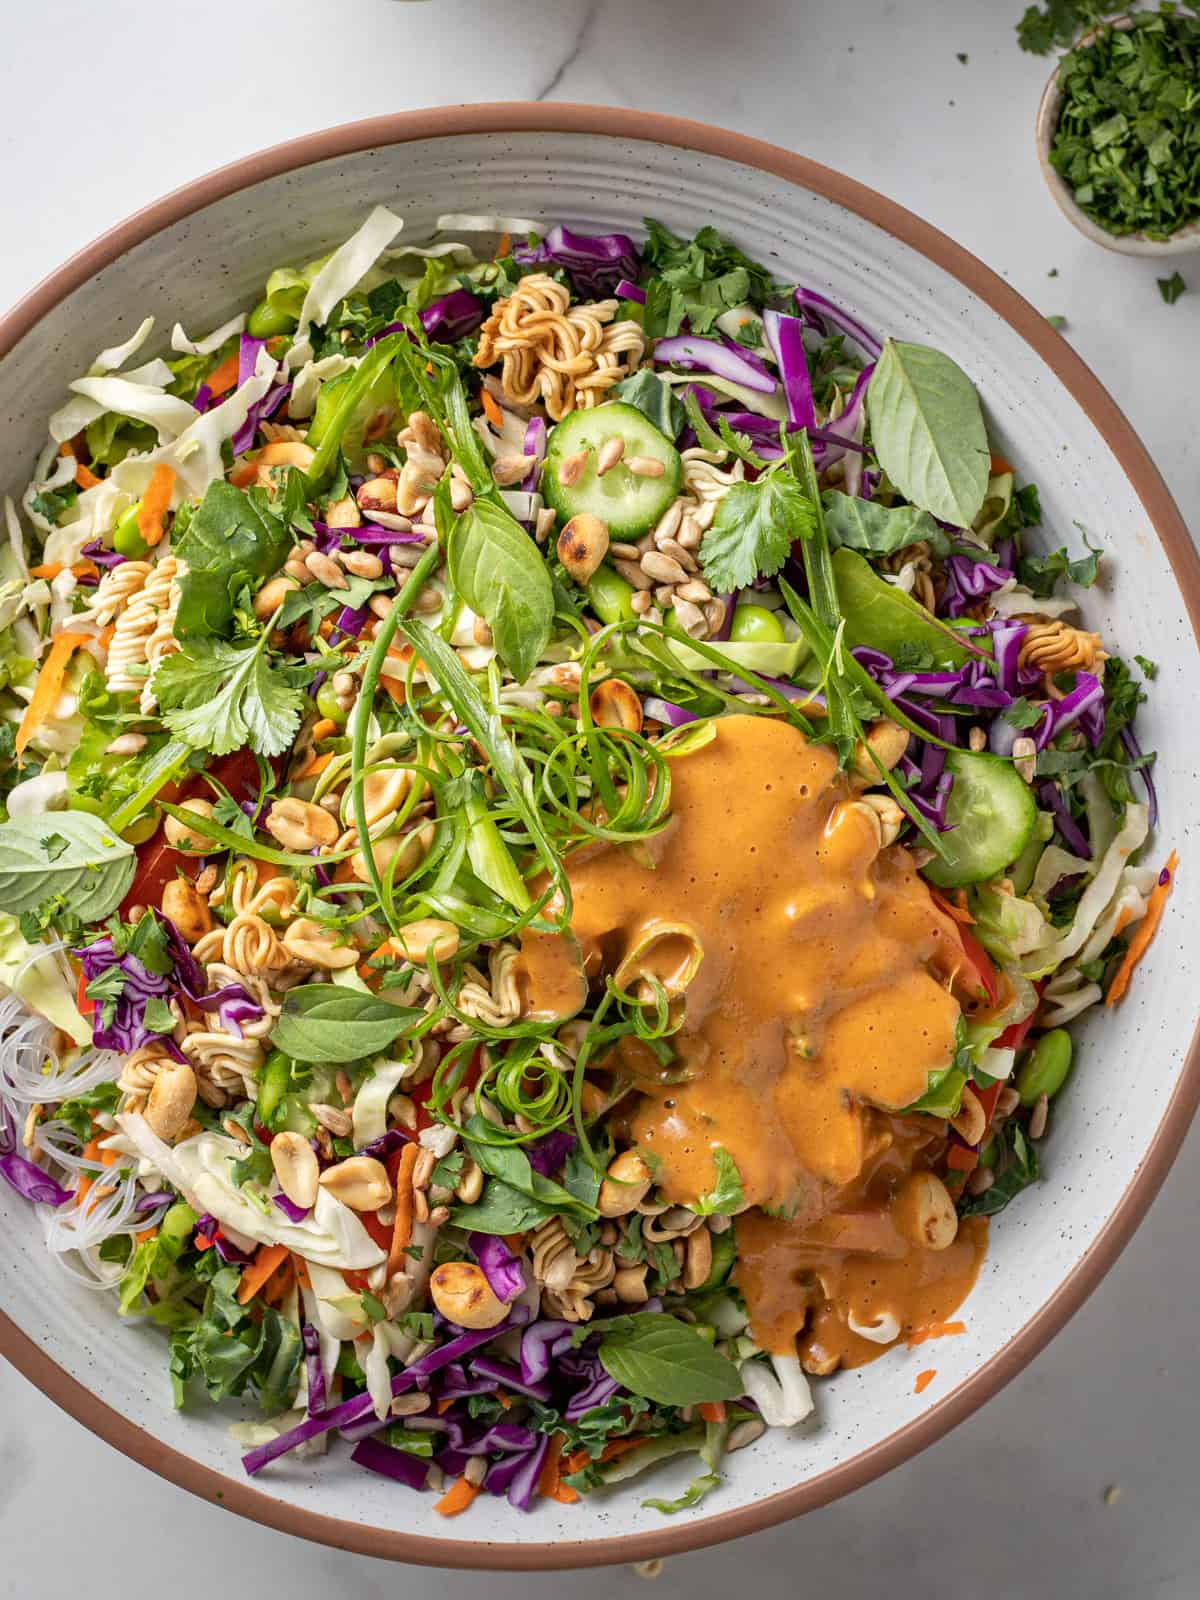 Large Asian slaw with peanut dressing drizzled on top.